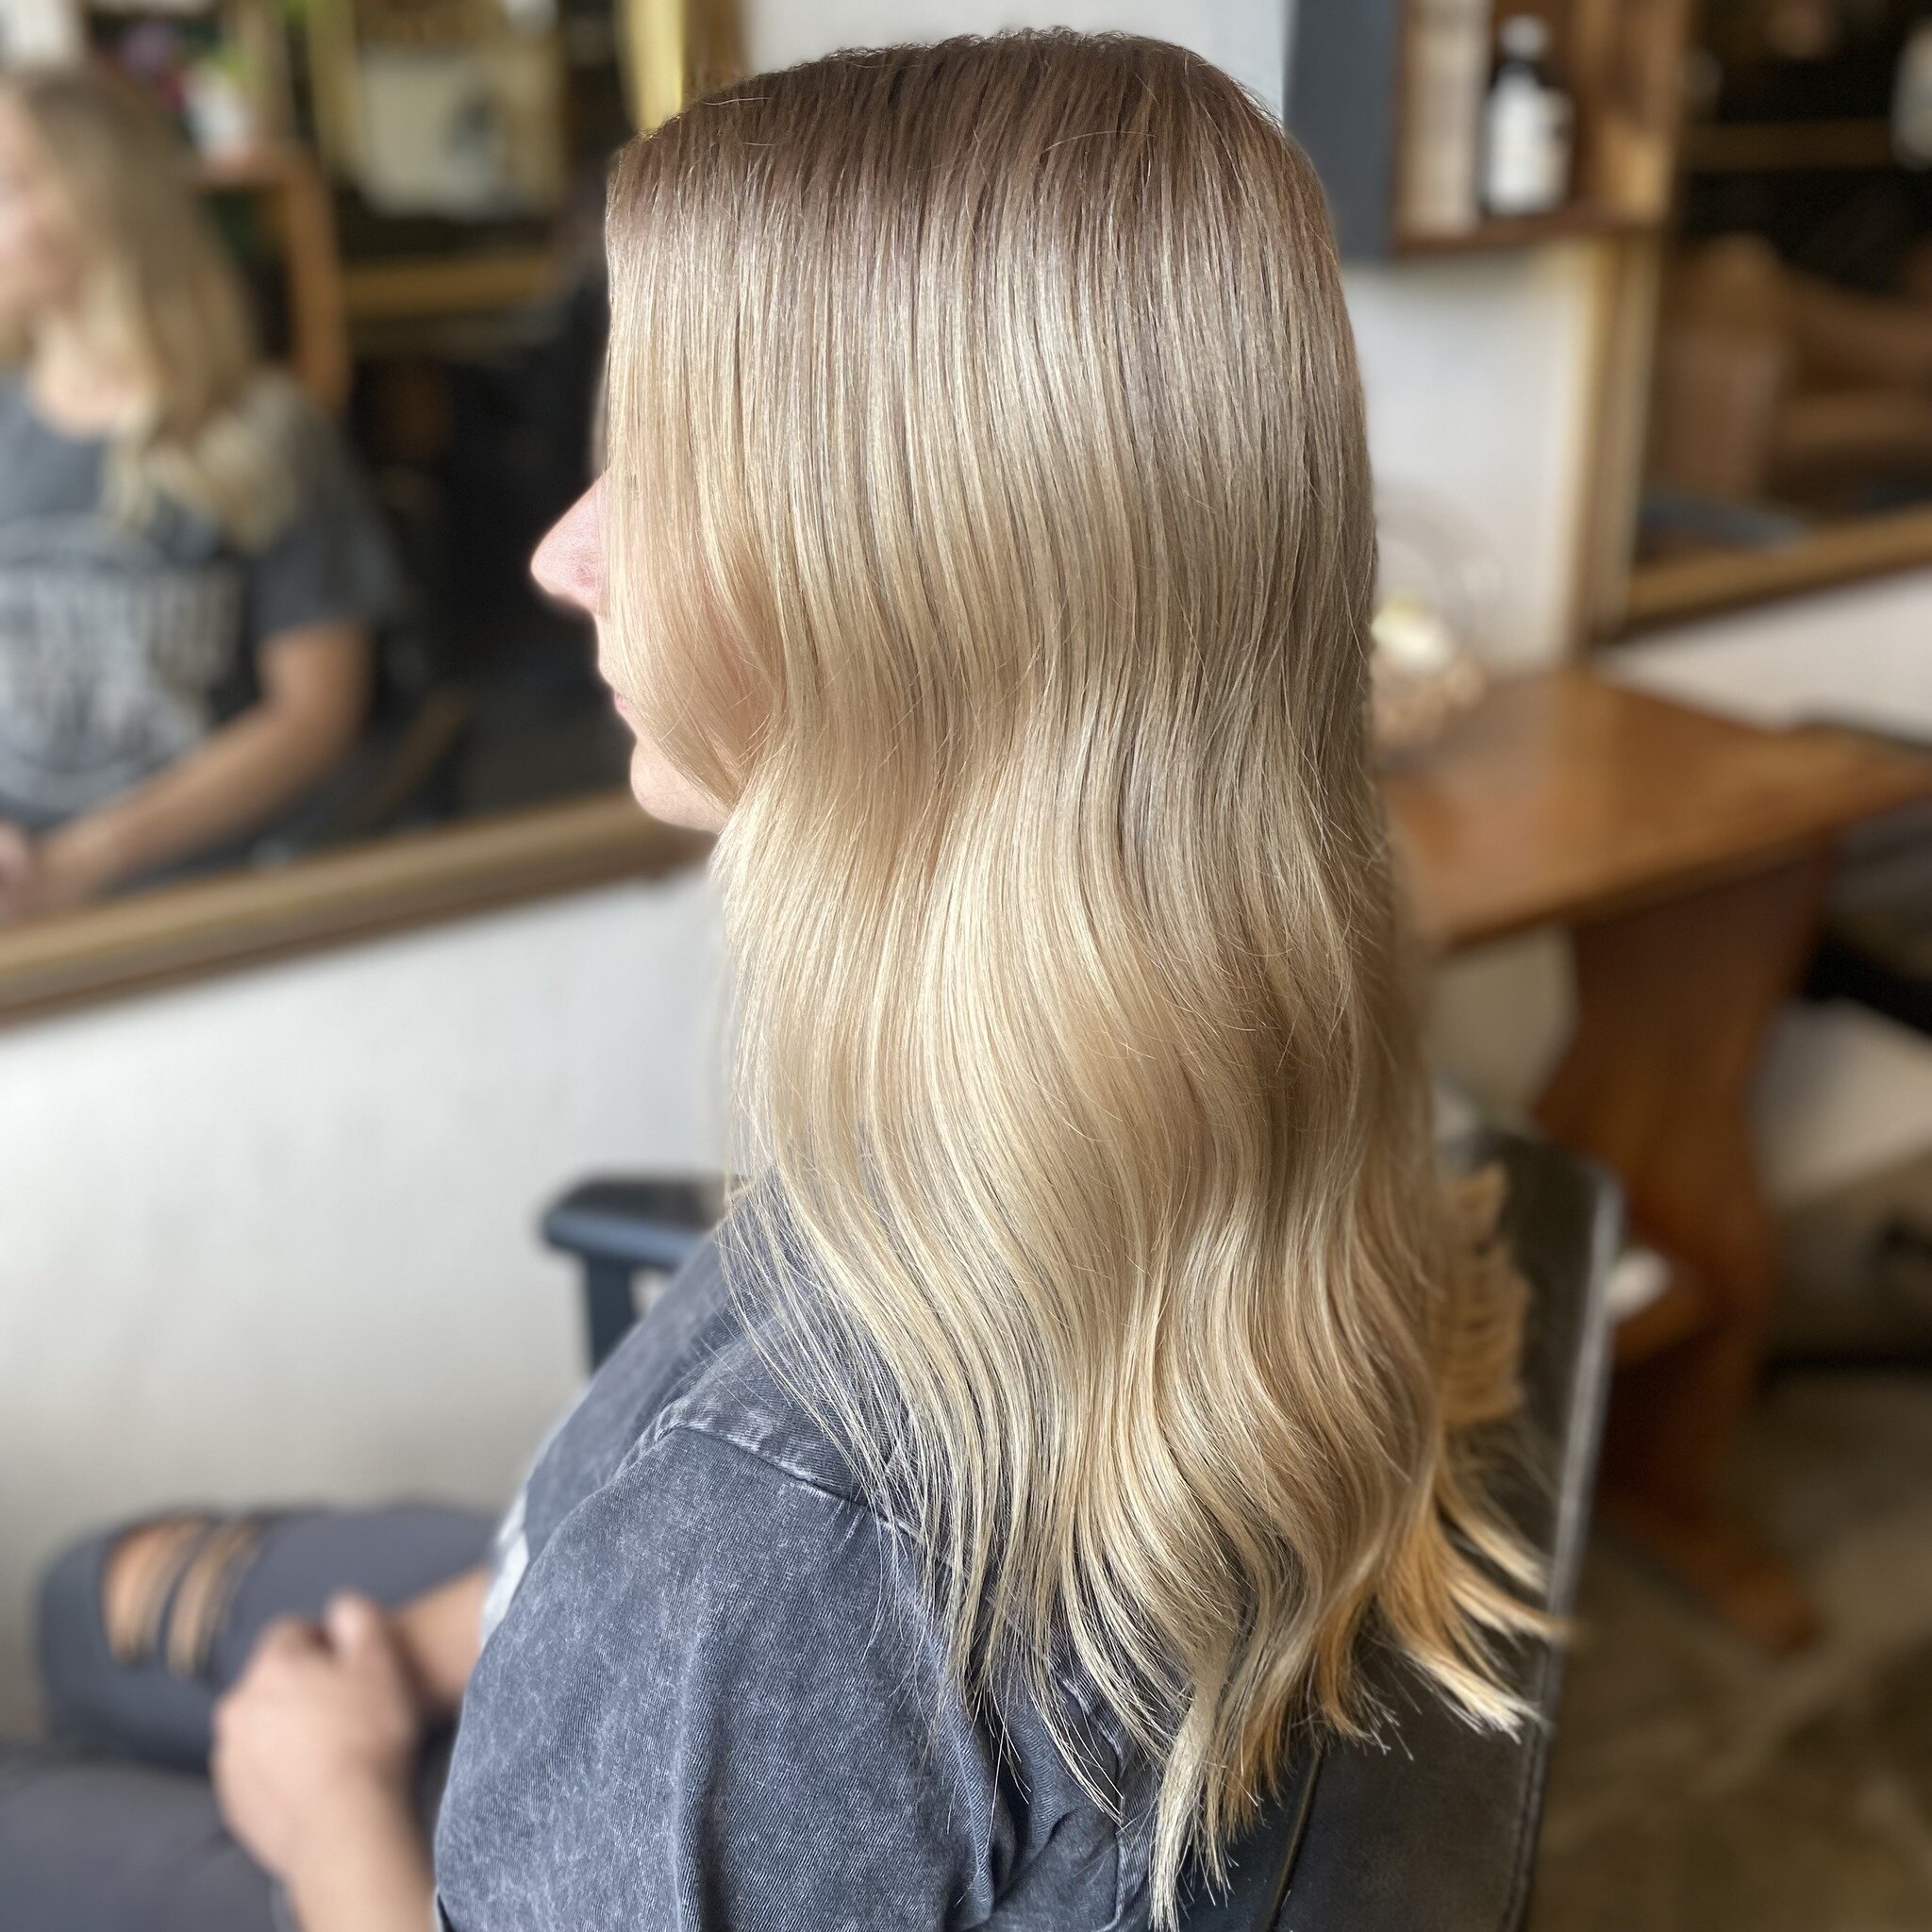 Gorgeous use of Original Mineral Clean Liquids High Gloss Range with @emma_morphhaircare. Thanks Emma for joining the Brooke + Sachi team for a morning of creativity. The perfect blend out of blonde to a Warm Winter-y lived in Blonde with a transpare